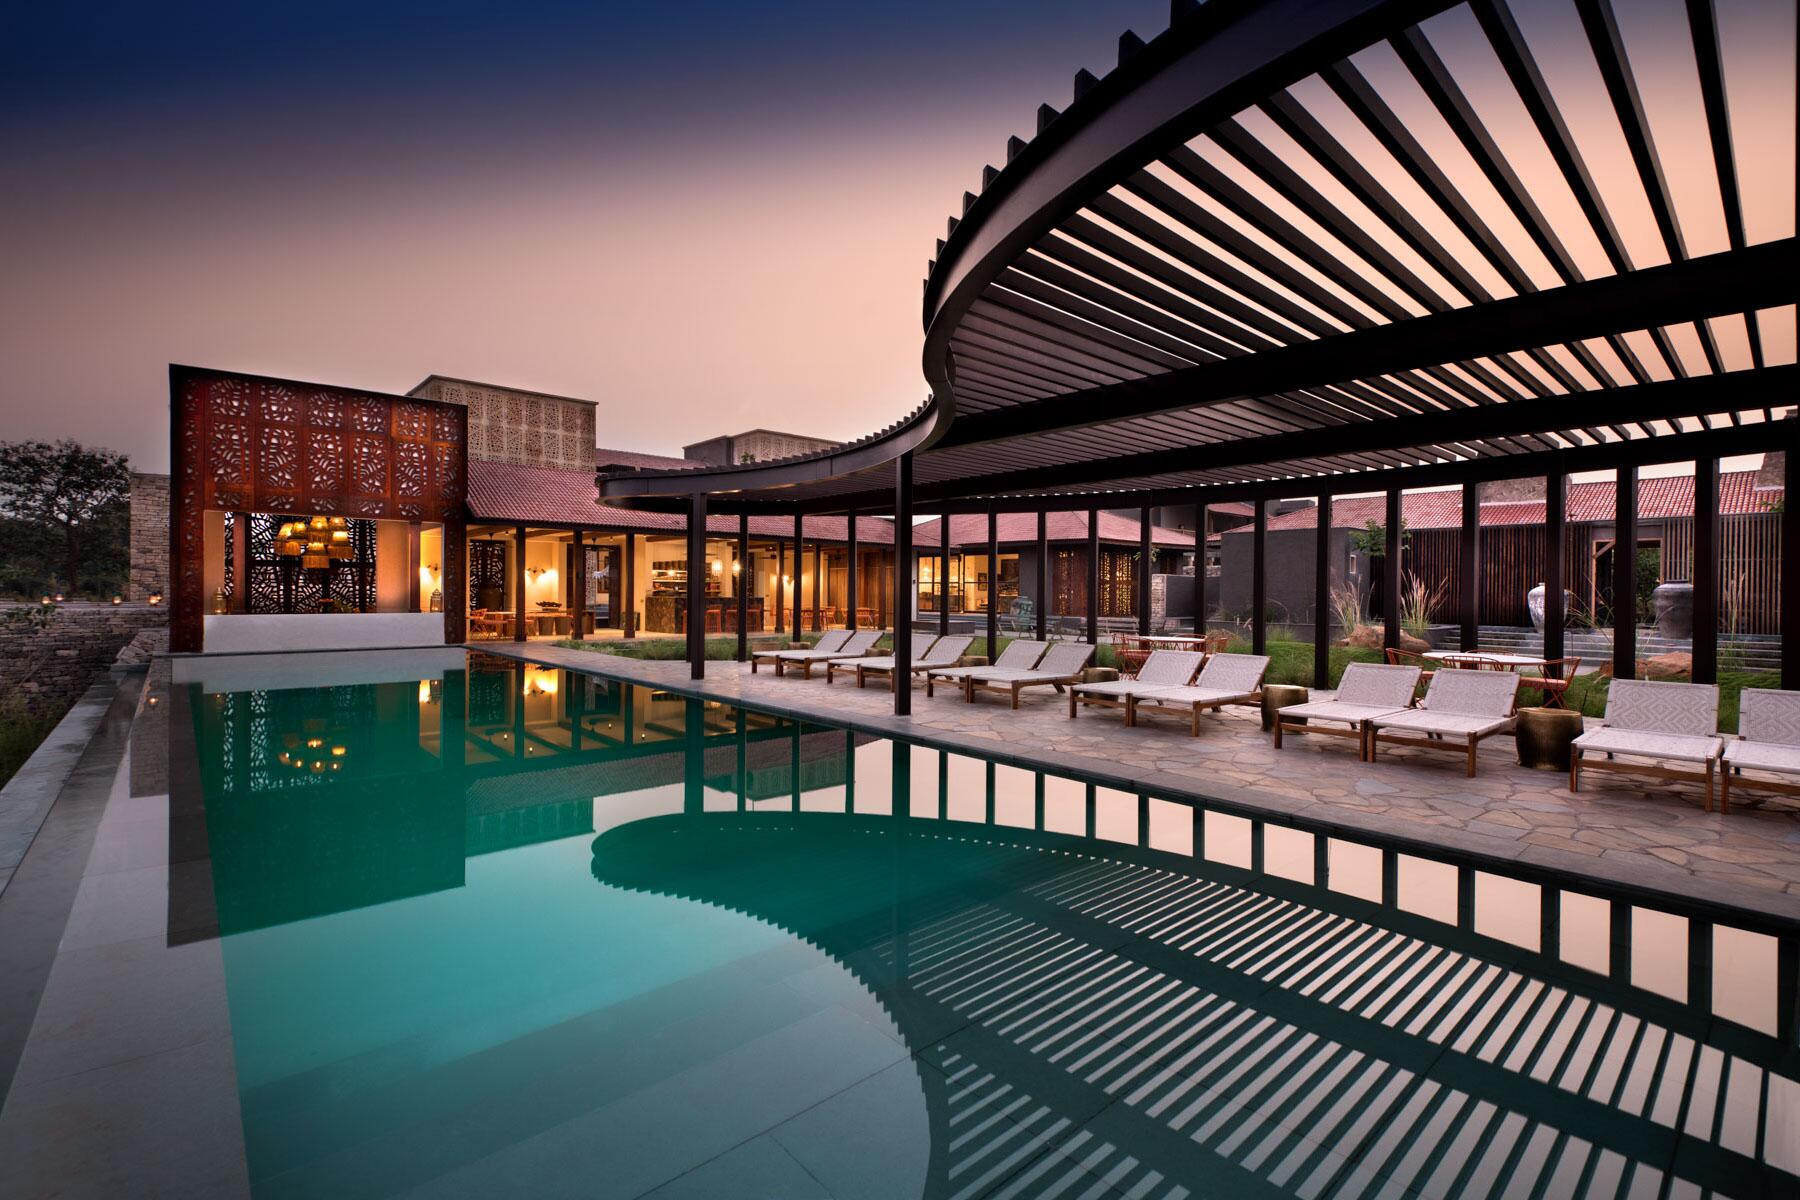 The 9 Best Hotels in Asia in 2023